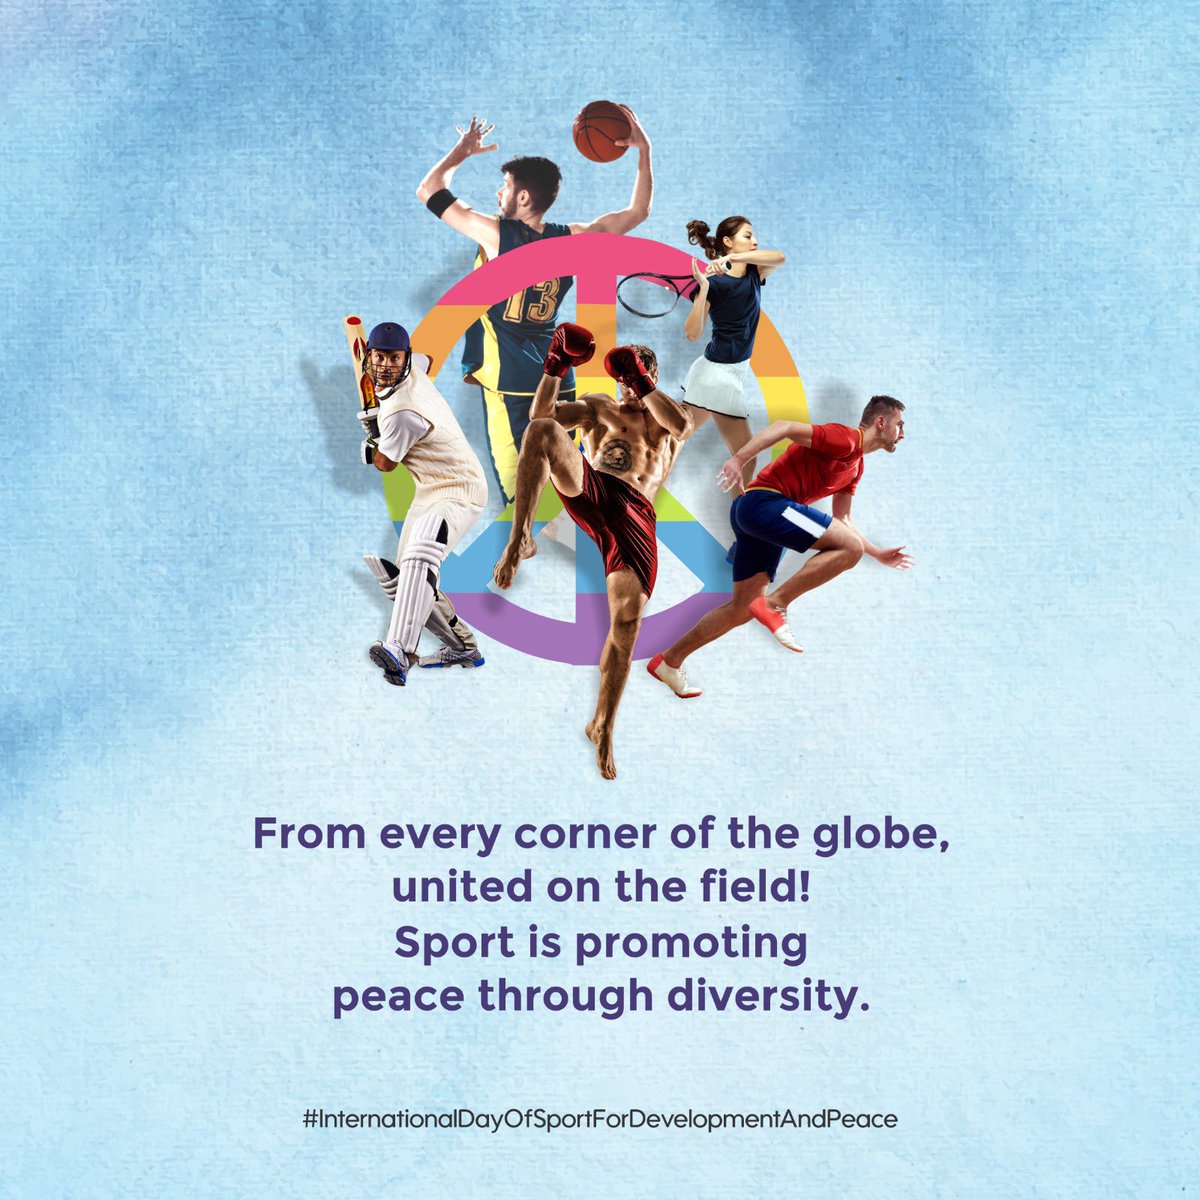 Sport, a global unifying factor, transcends boundaries and promotes unity in diversity. Together, let us celebrate the transformative power of sport!